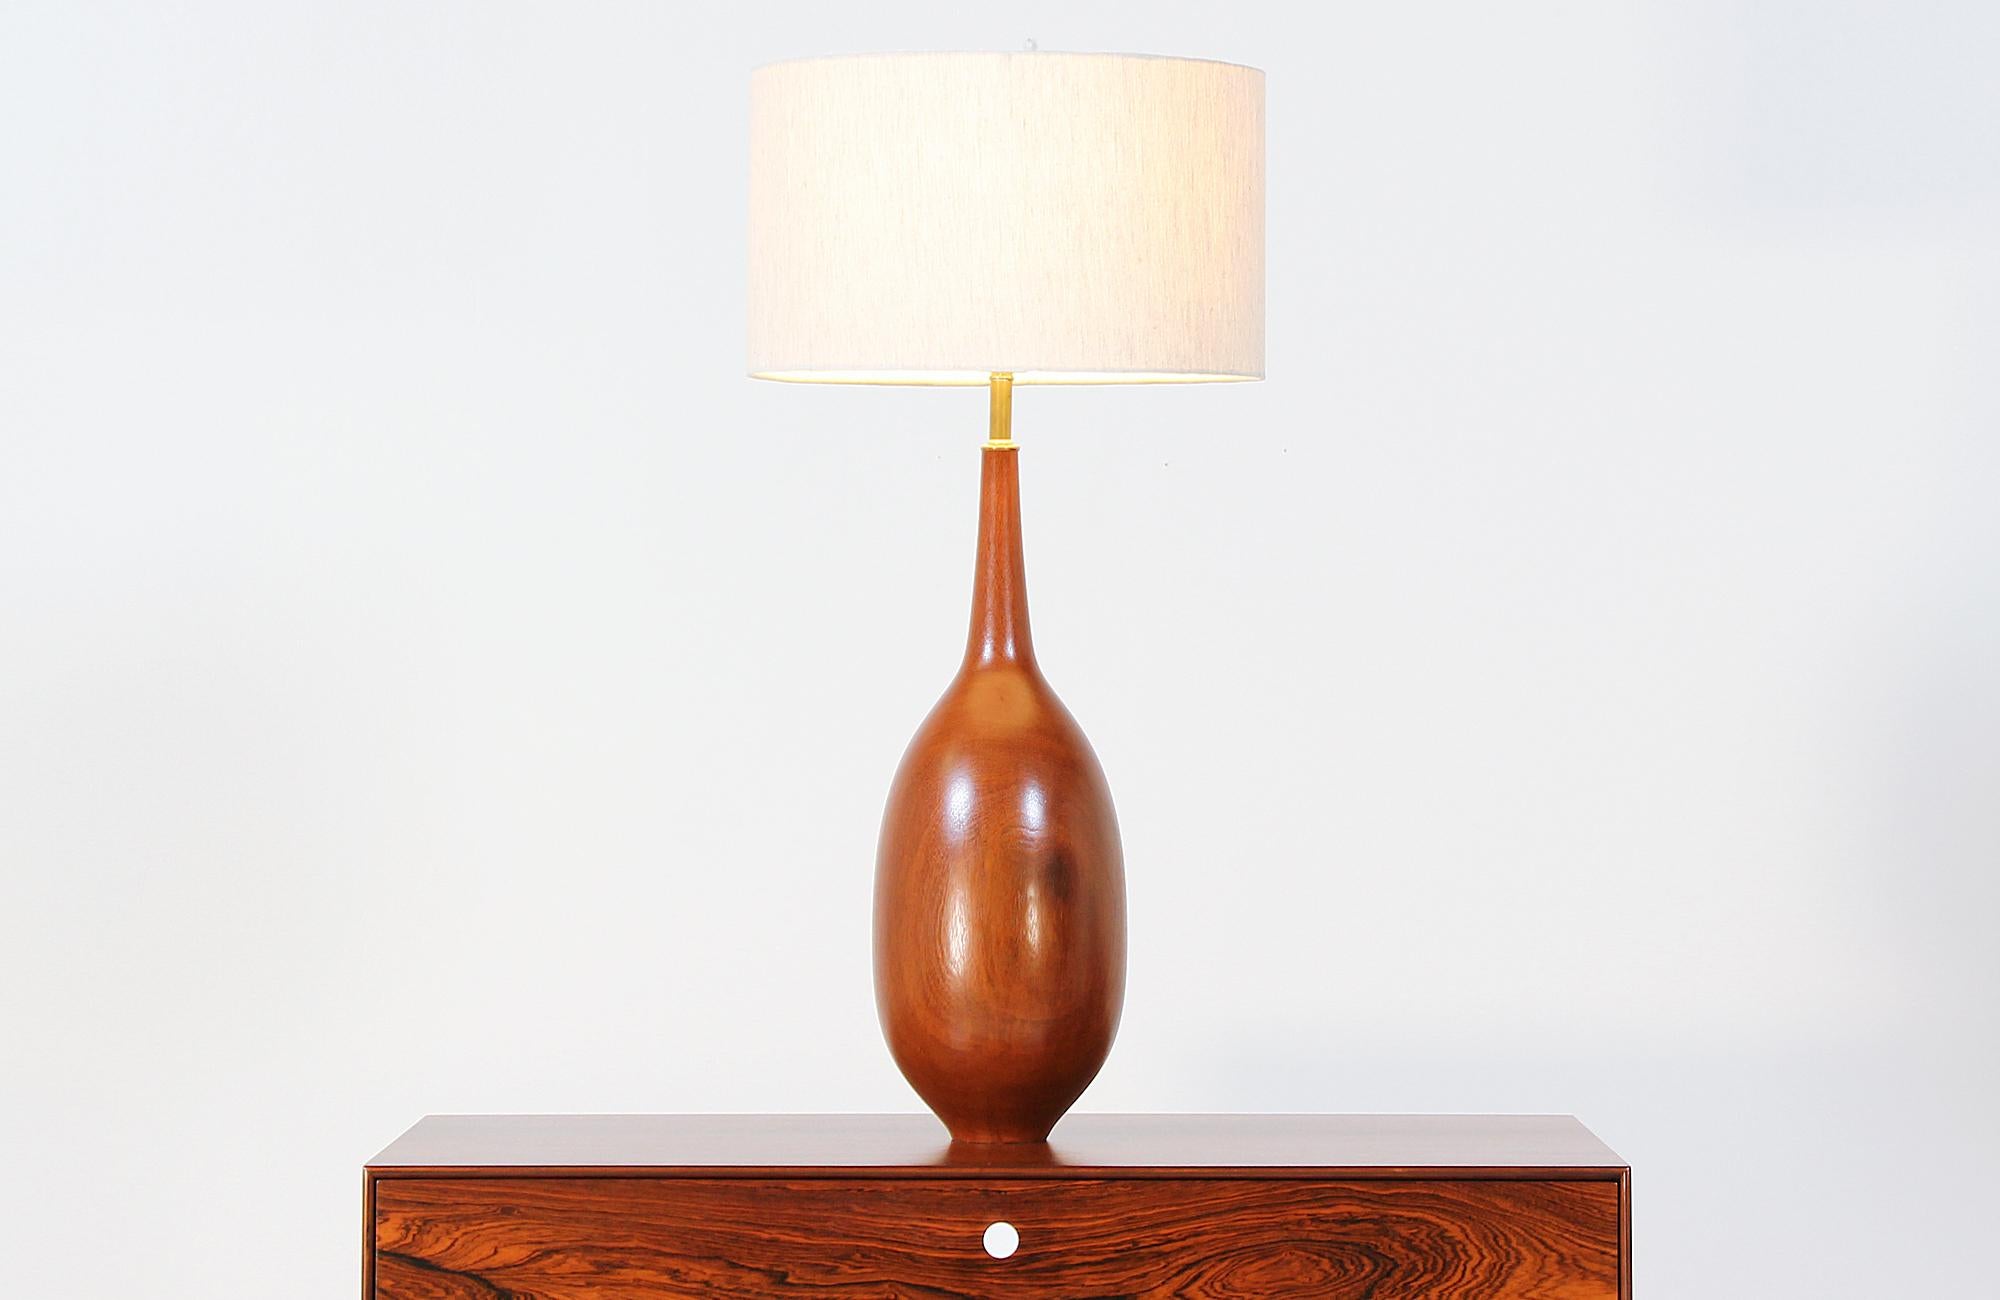 Spectacular table lamp designed and manufactured in Denmark, circa 1950s. This lamp features a teak wood turned body with organic curves in the shape of a teardrop. It is very solid and has been fully refinished, making it the perfect mid-century